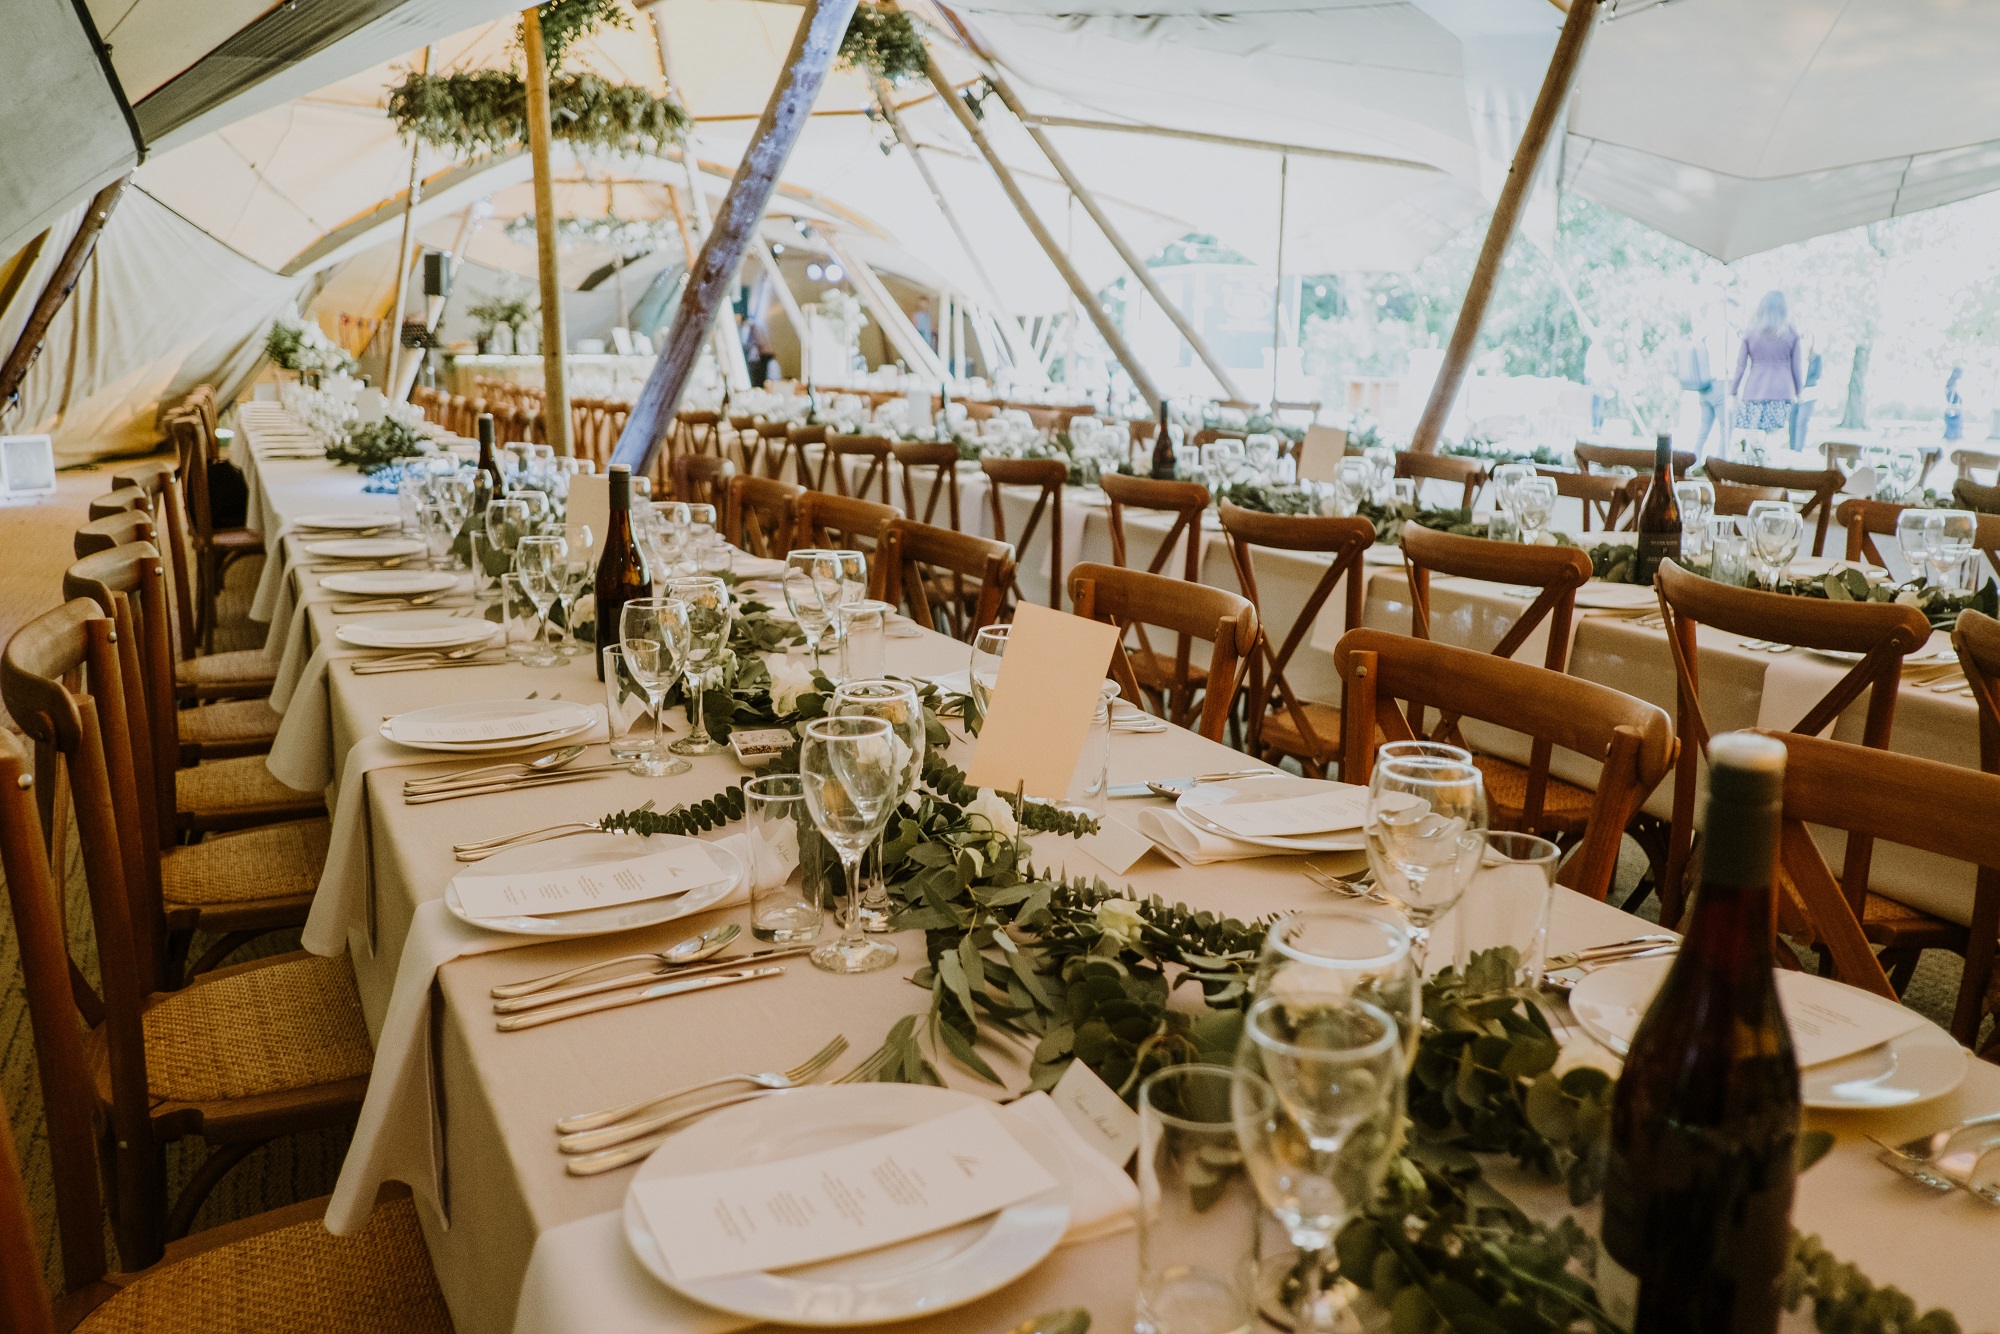 Whitewed Directory dilemma blog What to consider when choosing your wedding venue setting price food bar location cost teepee wedding DIY Alexandra Jane Photography